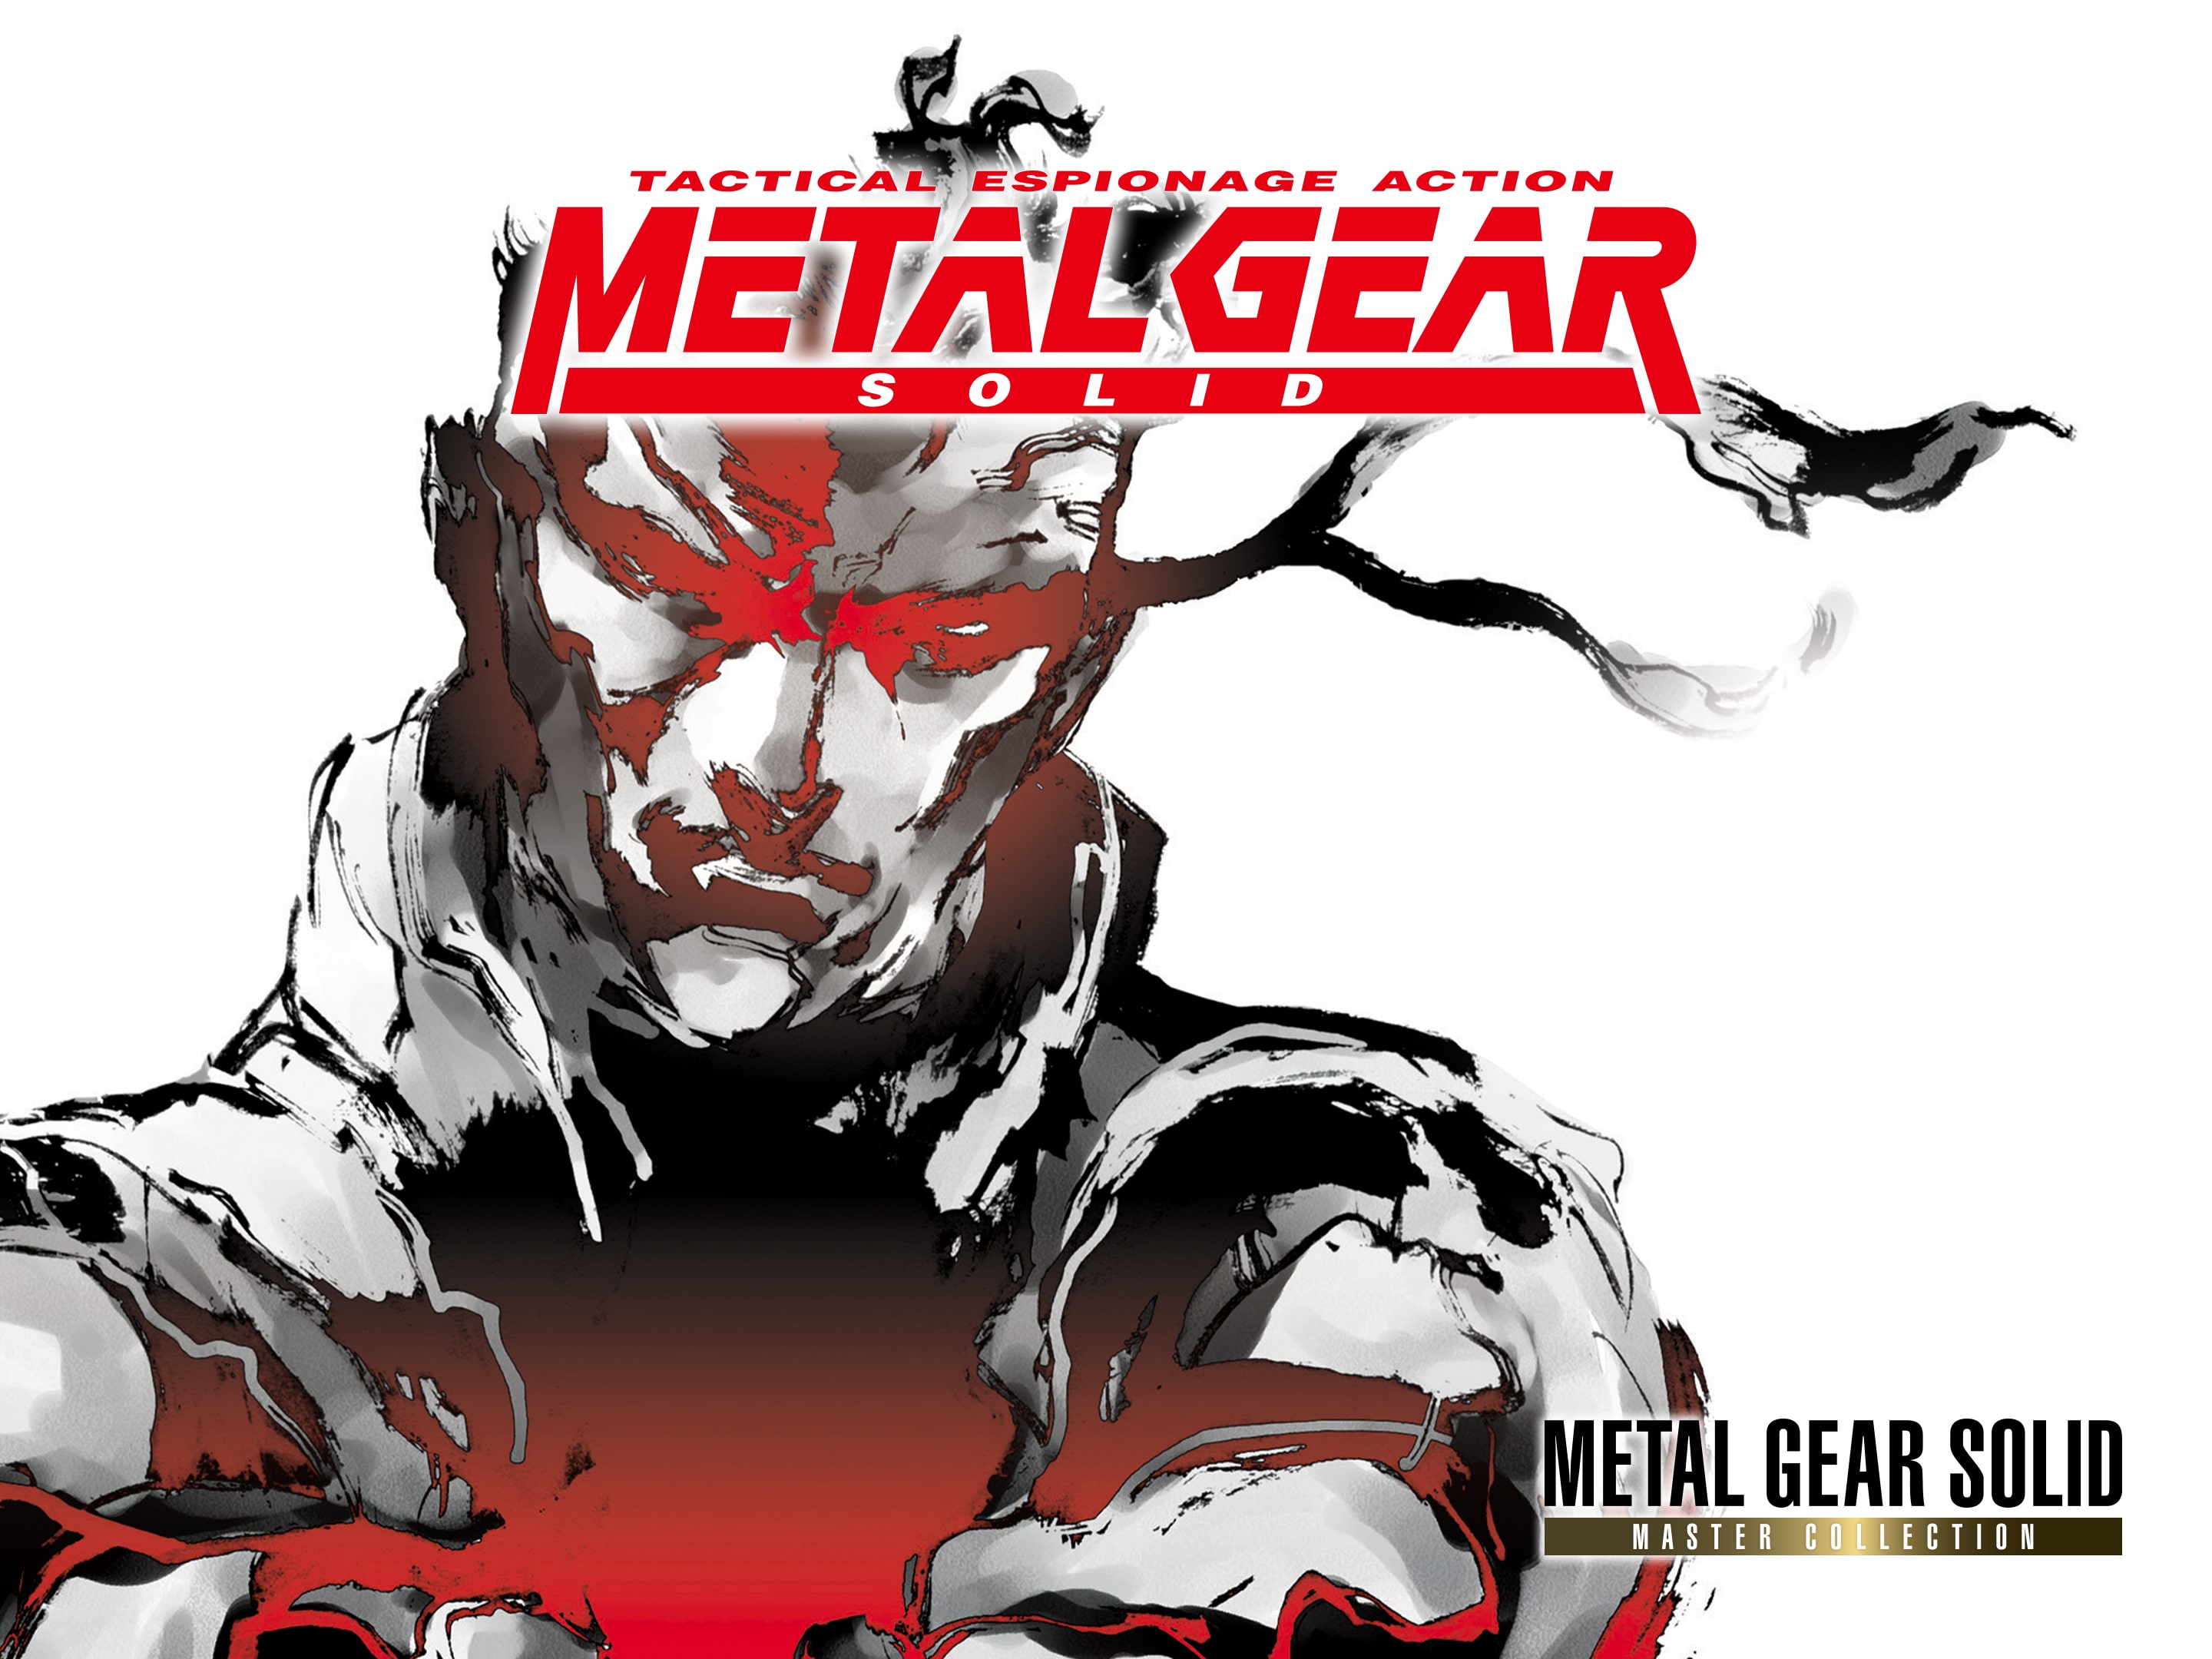 METAL GEAR SOLID 3: Snake Eater - Master Collection Version PS4 & PS5